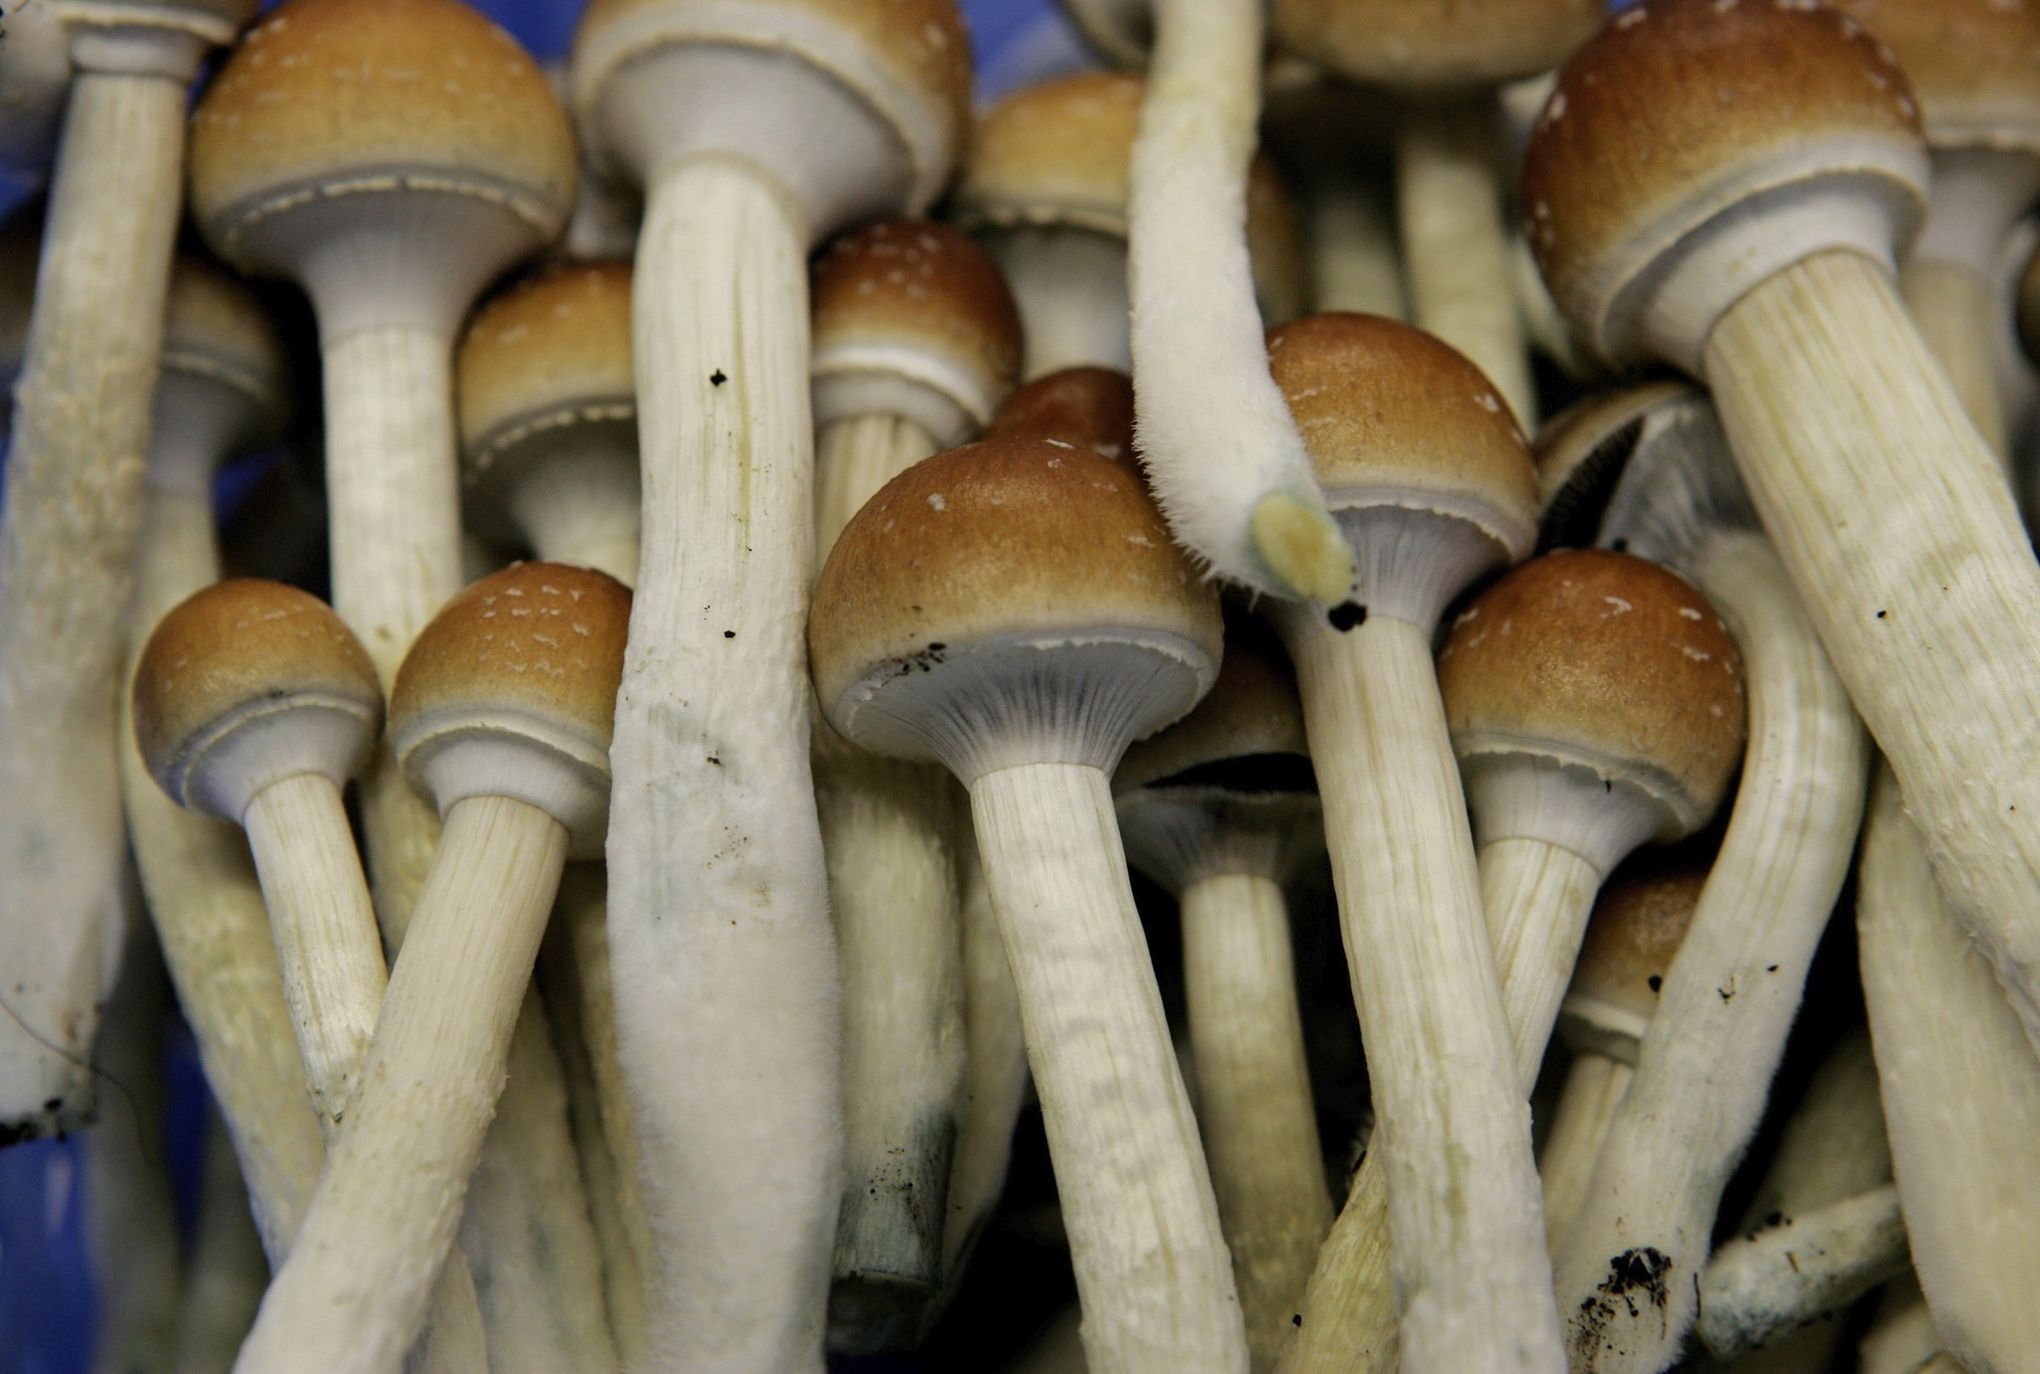 How Does Psilocybin Therapy Work?